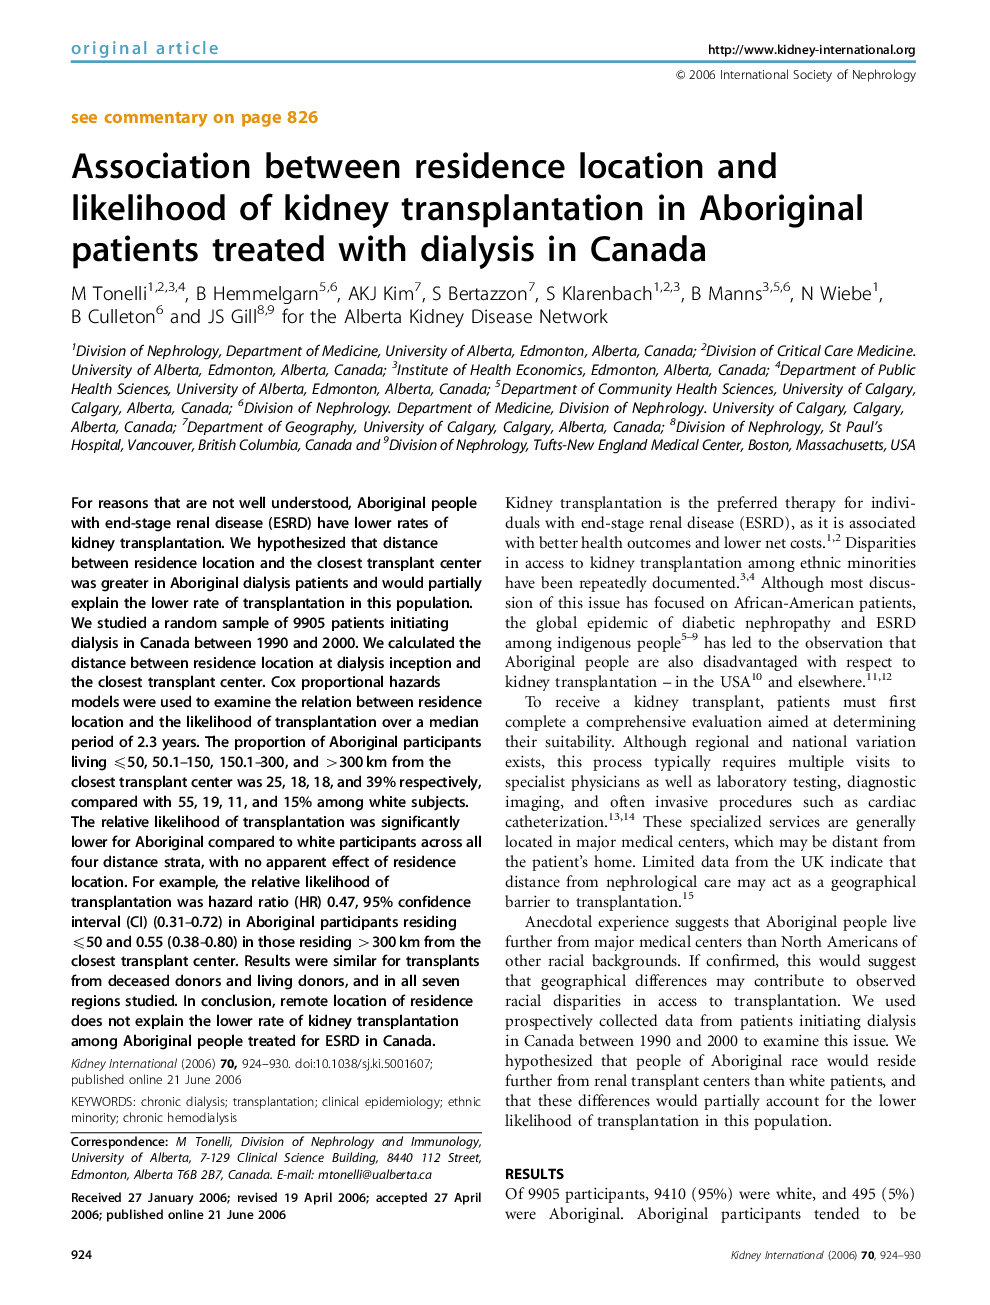 Association between residence location and likelihood of kidney transplantation in Aboriginal patients treated with dialysis in Canada